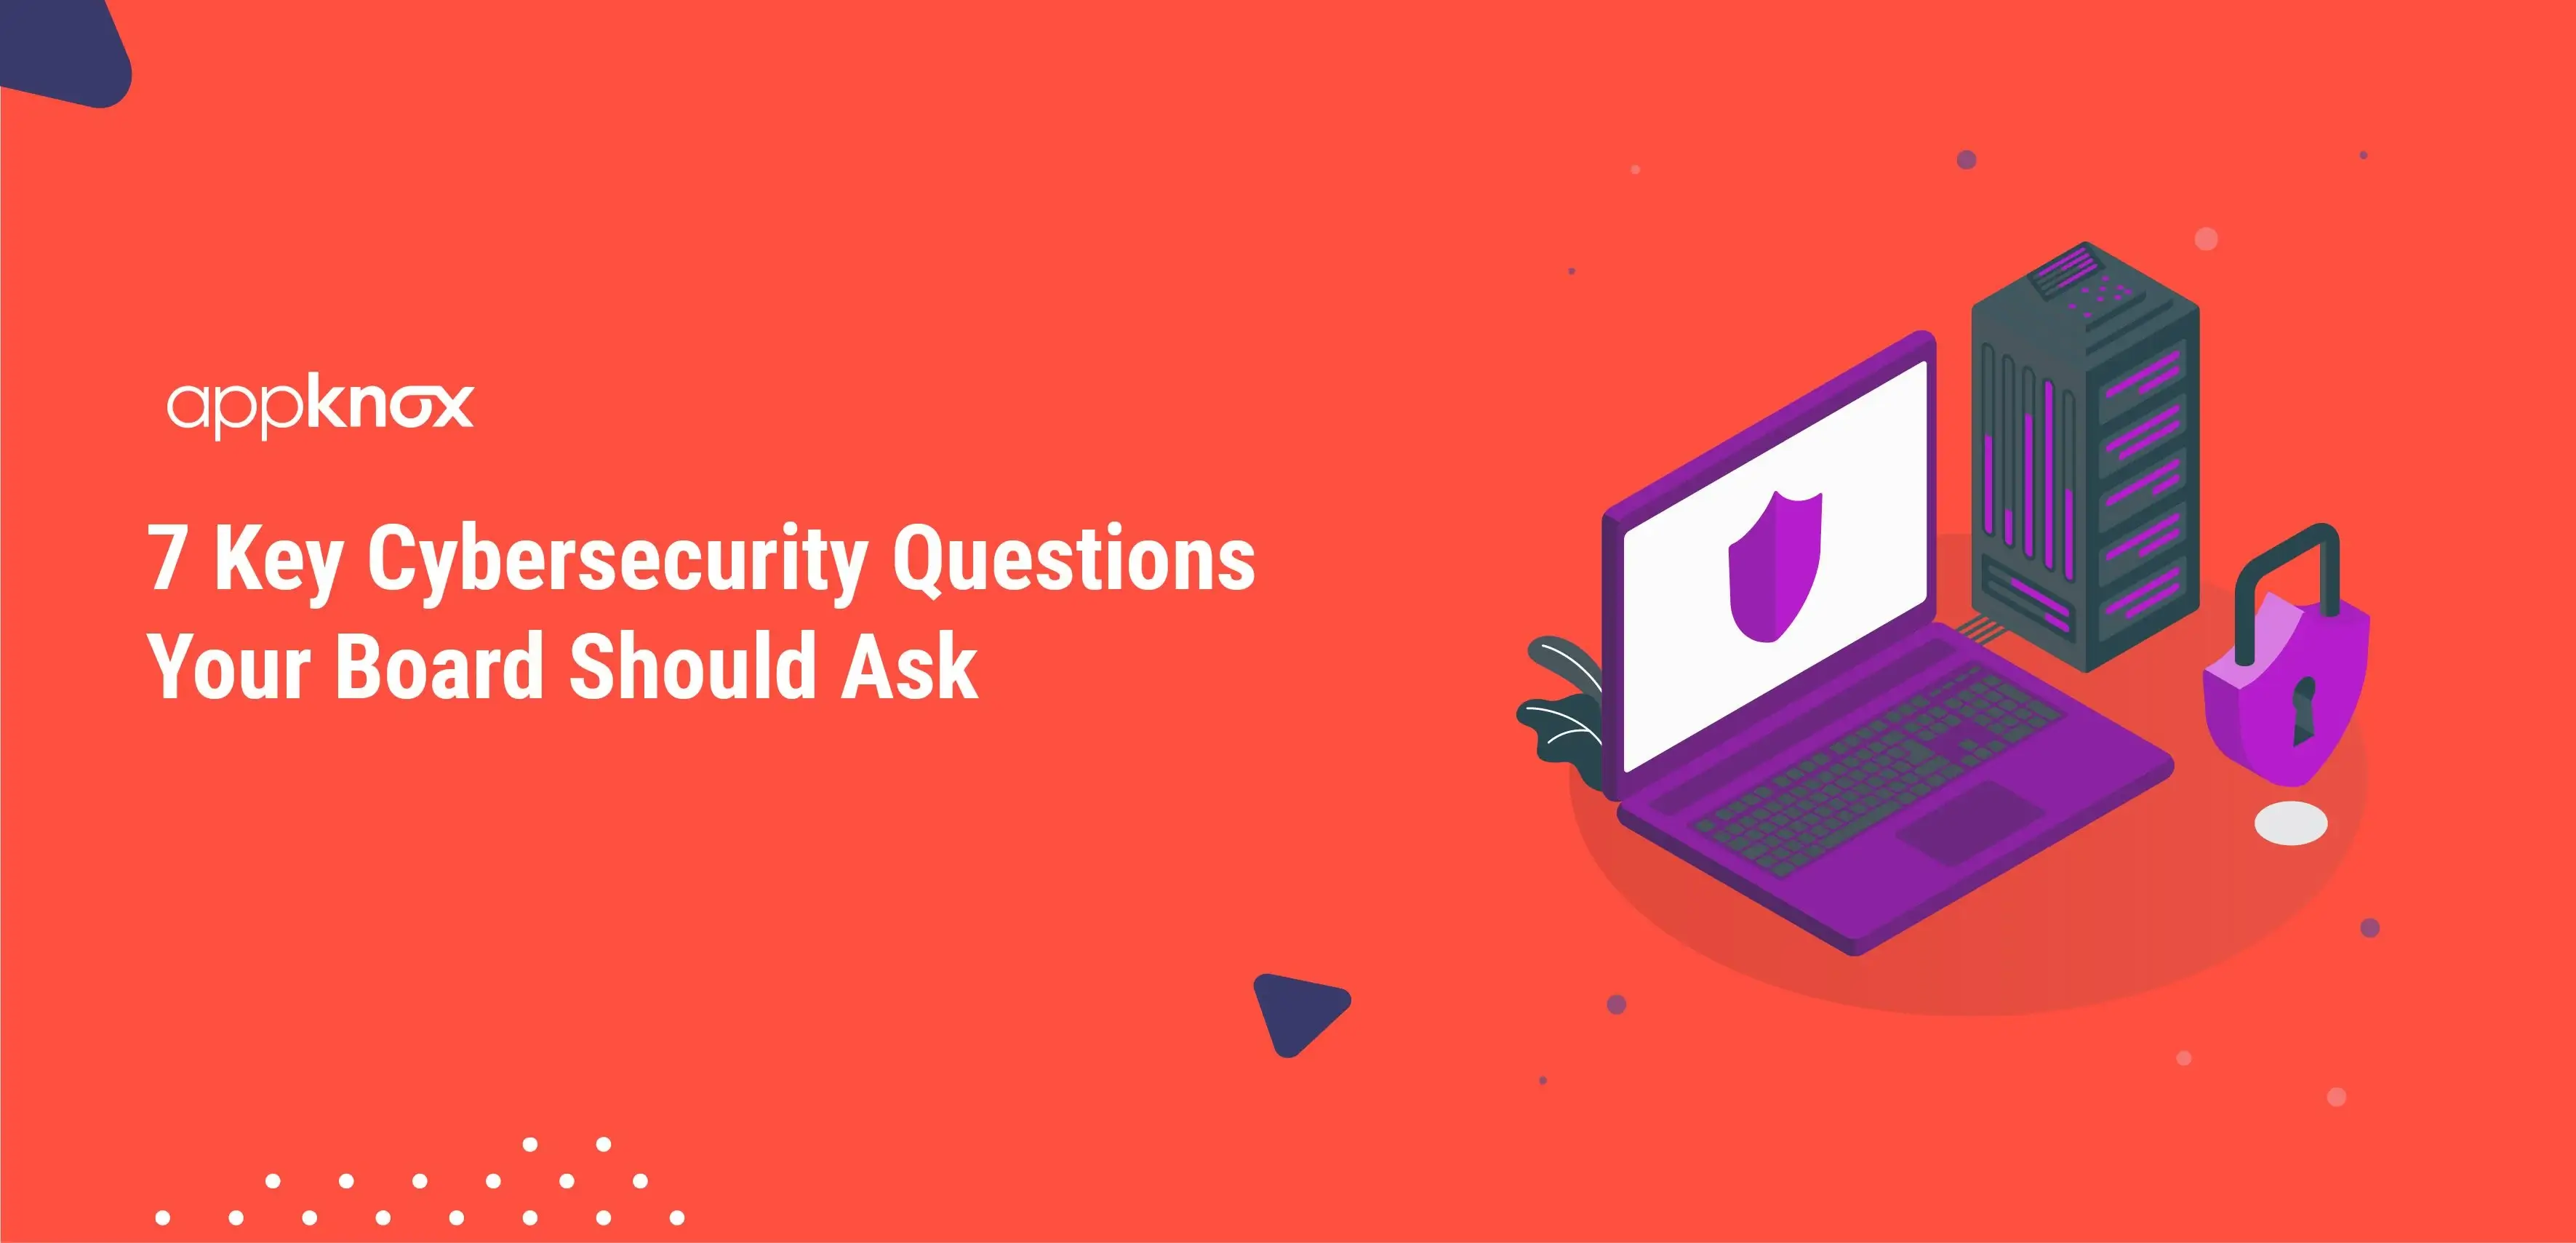 7 Key Cybersecurity Questions Your Board Should Ask